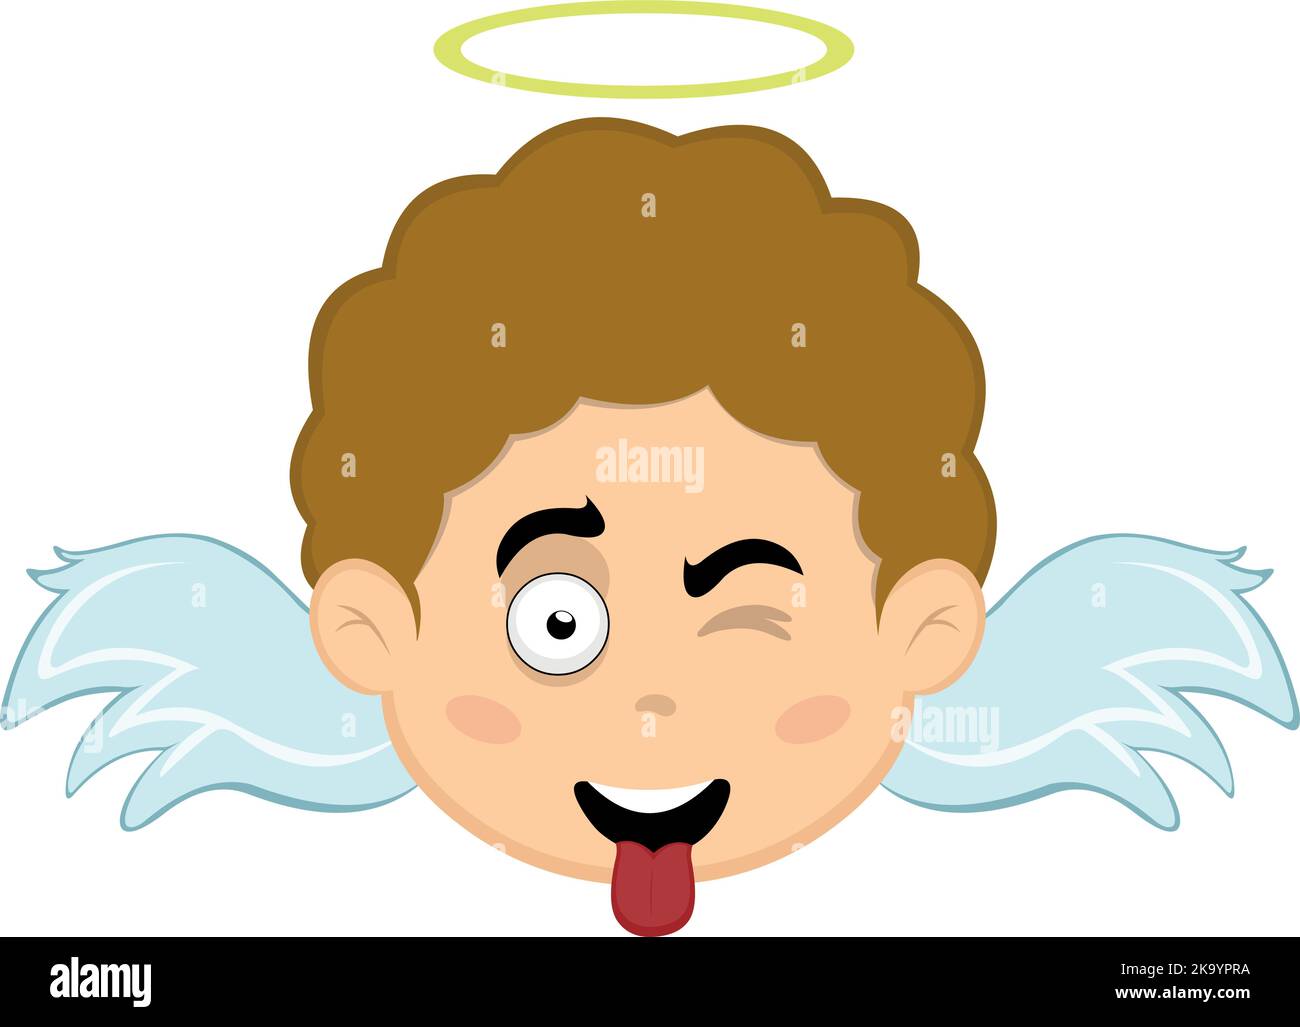 Vector illustration of a child angel cartoon winking and with his tongue out Stock Vector